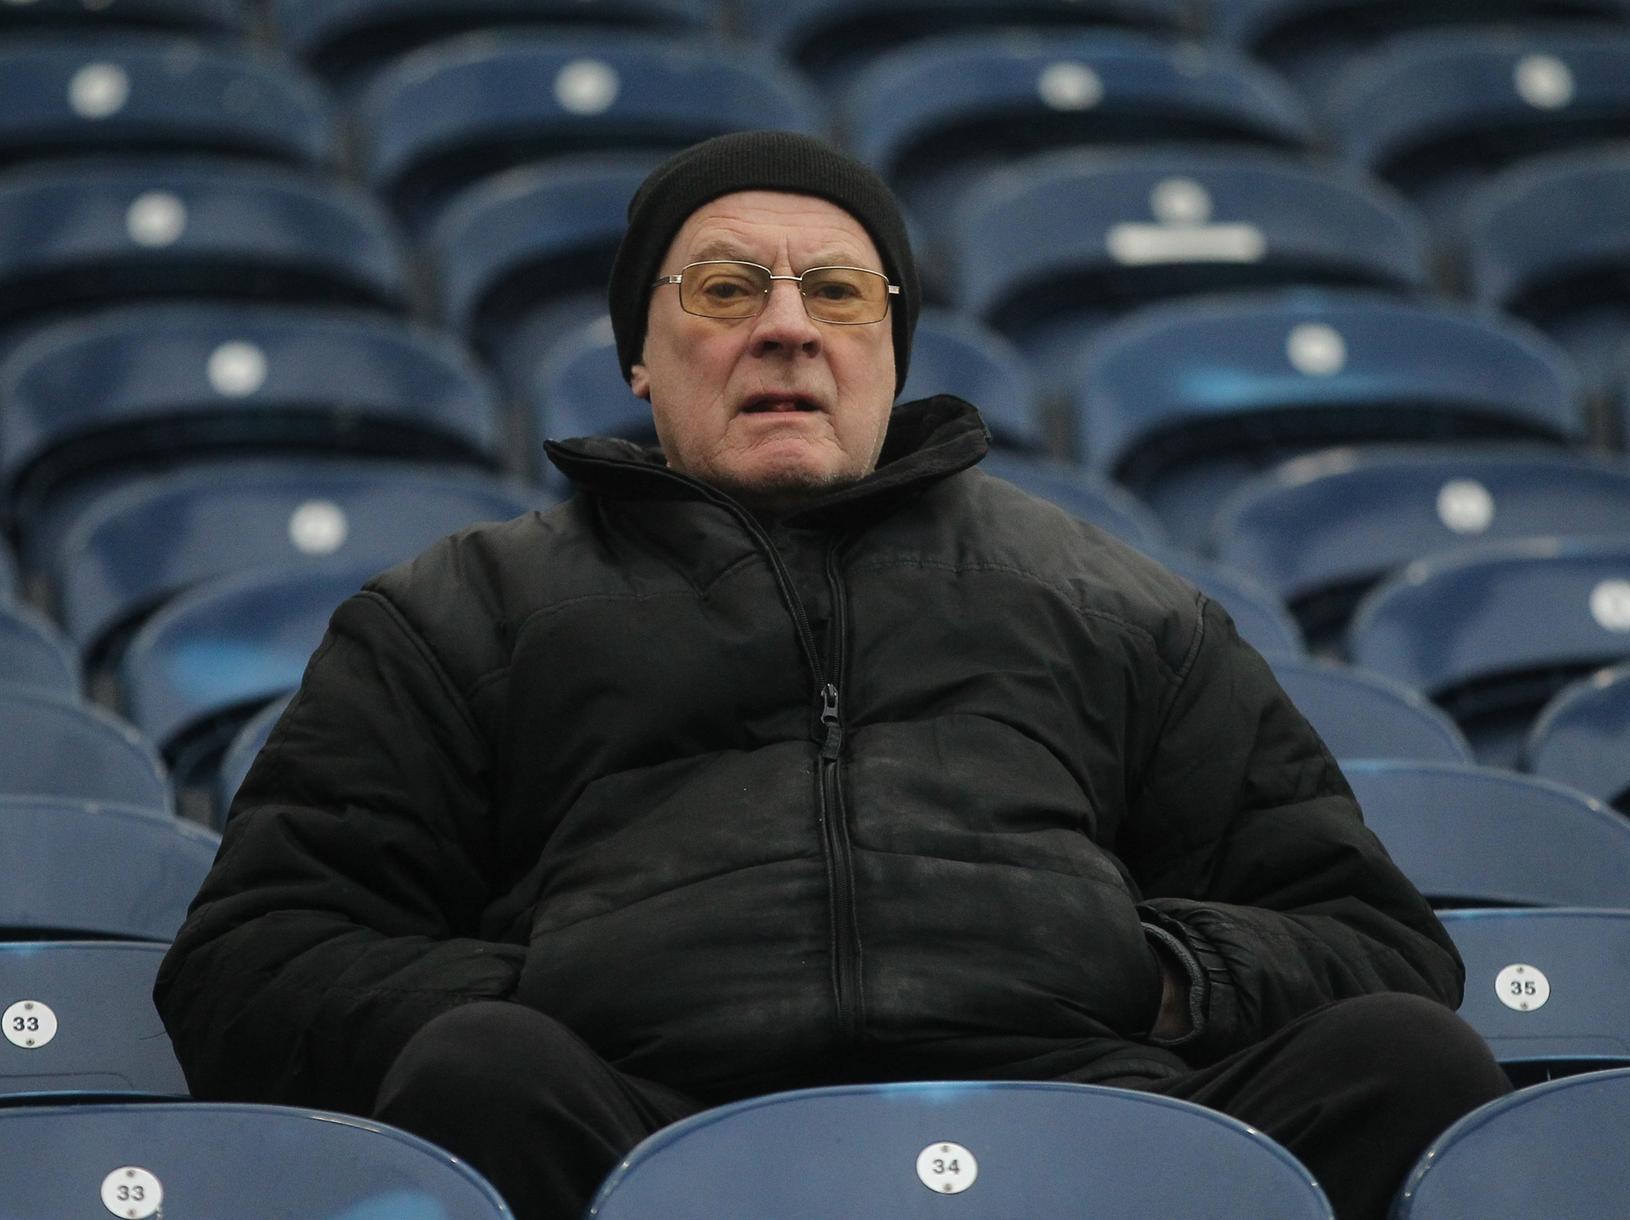 A North End fan doesn't look best pleased as our photographer turns his lens to him as early comers wait on.